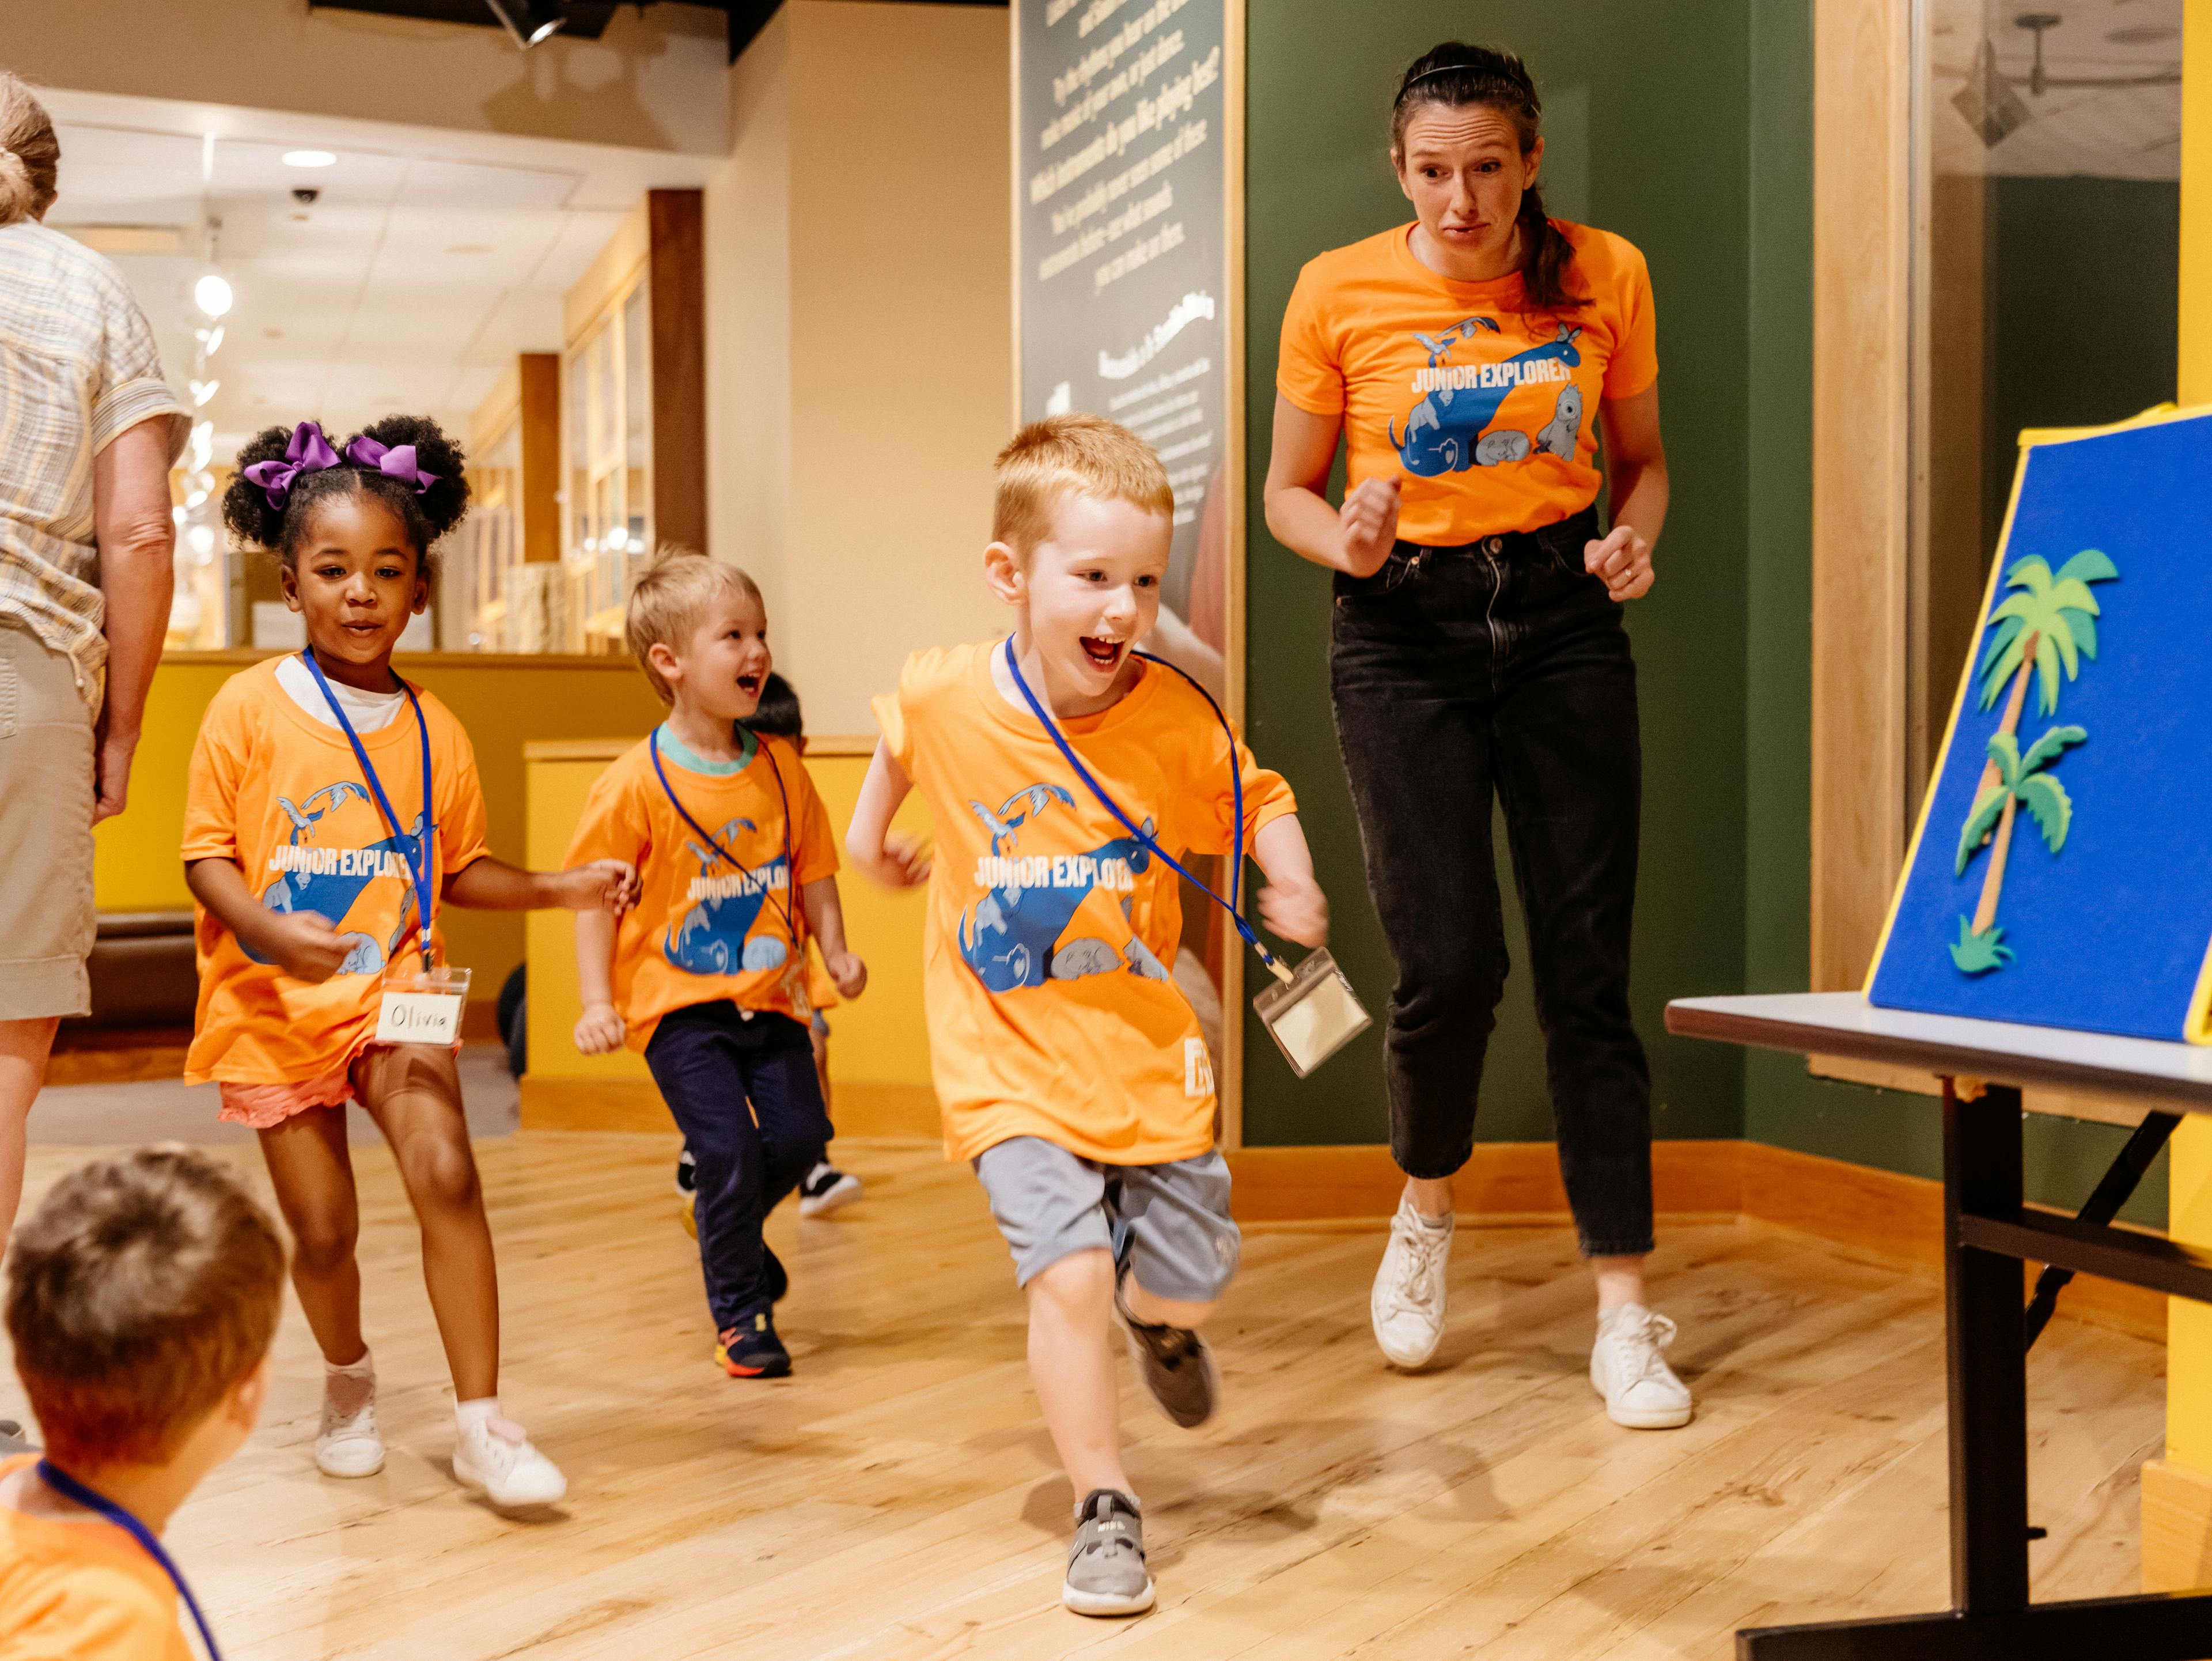 Three children interact with a camp staff member in a museum space. All are wearing matching orange shirts.